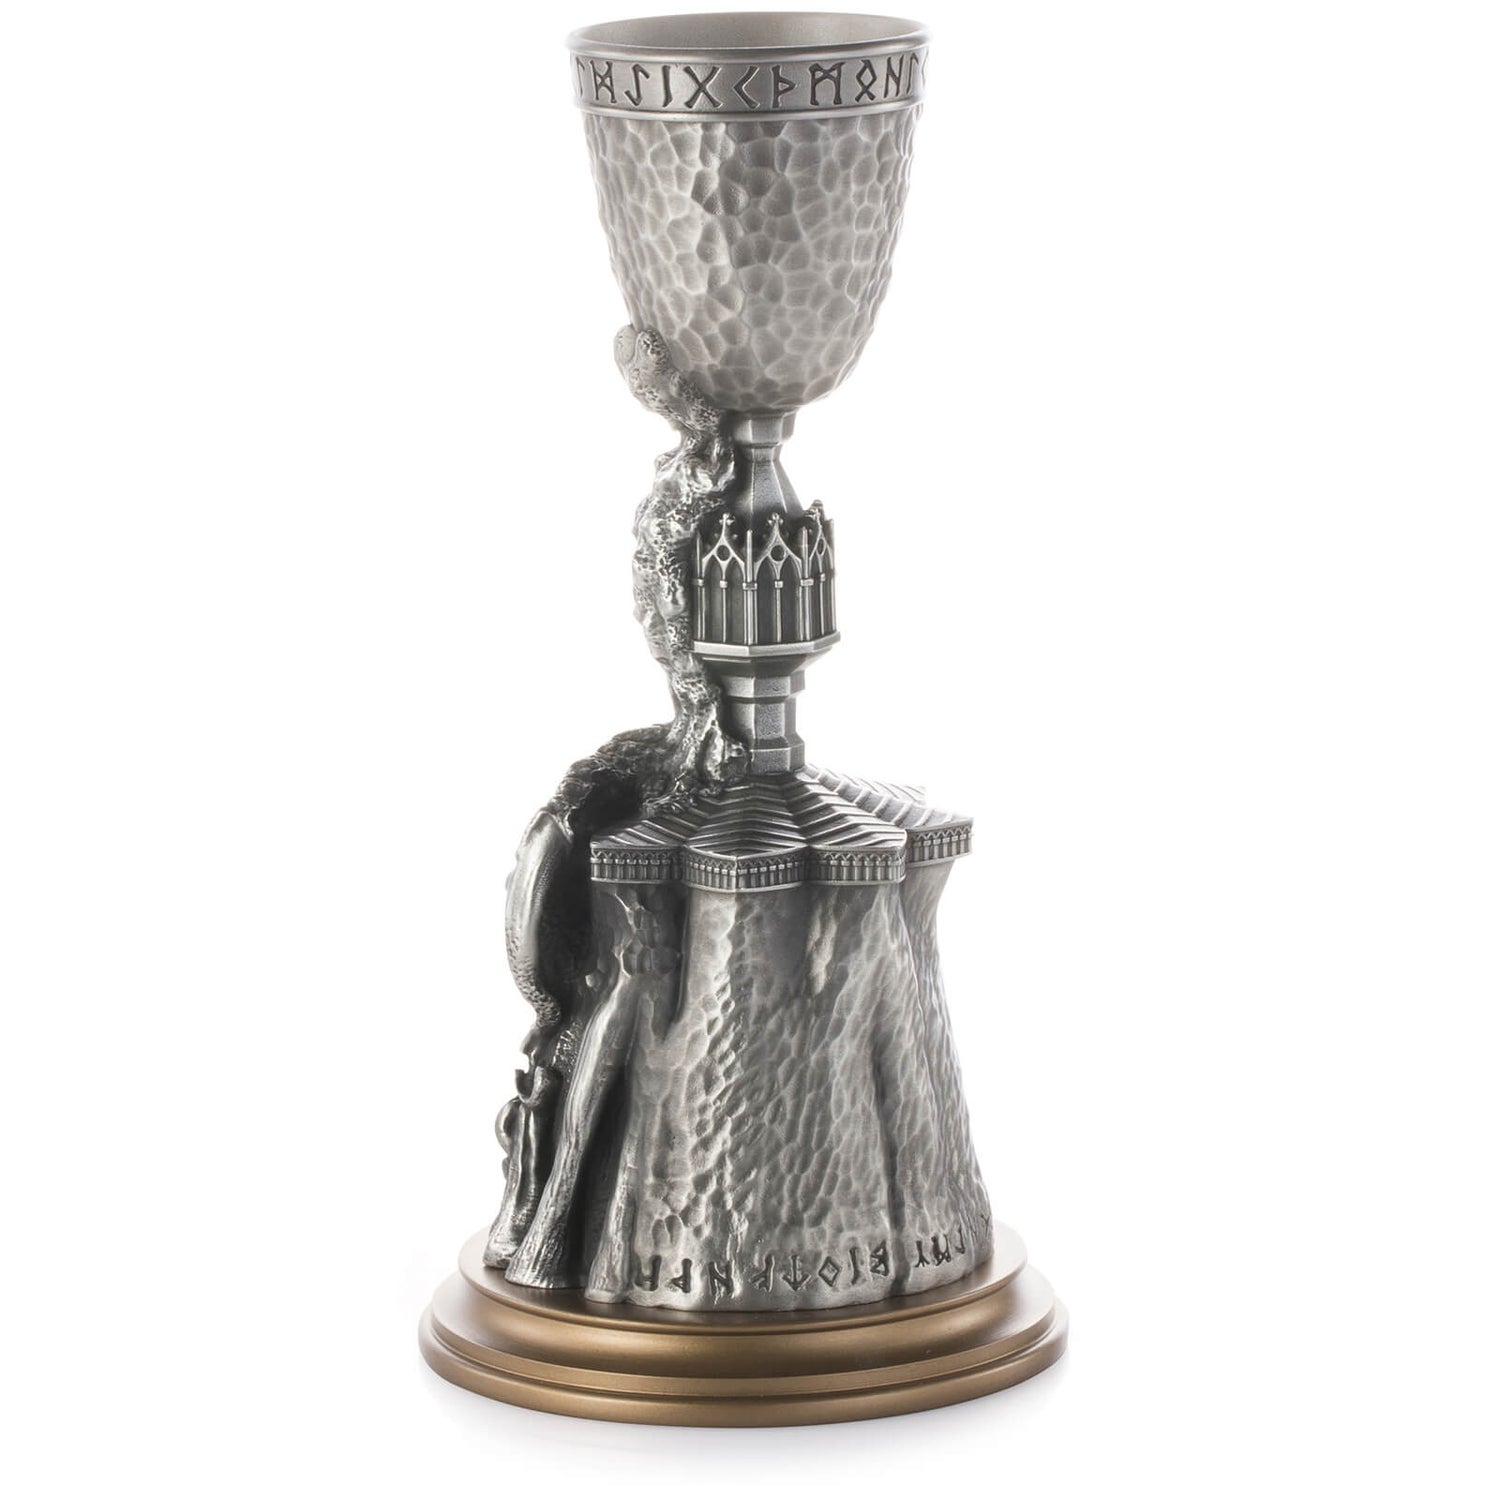 Royal Selangor Harry Potter Limited Edition Goblet of Fire Replica